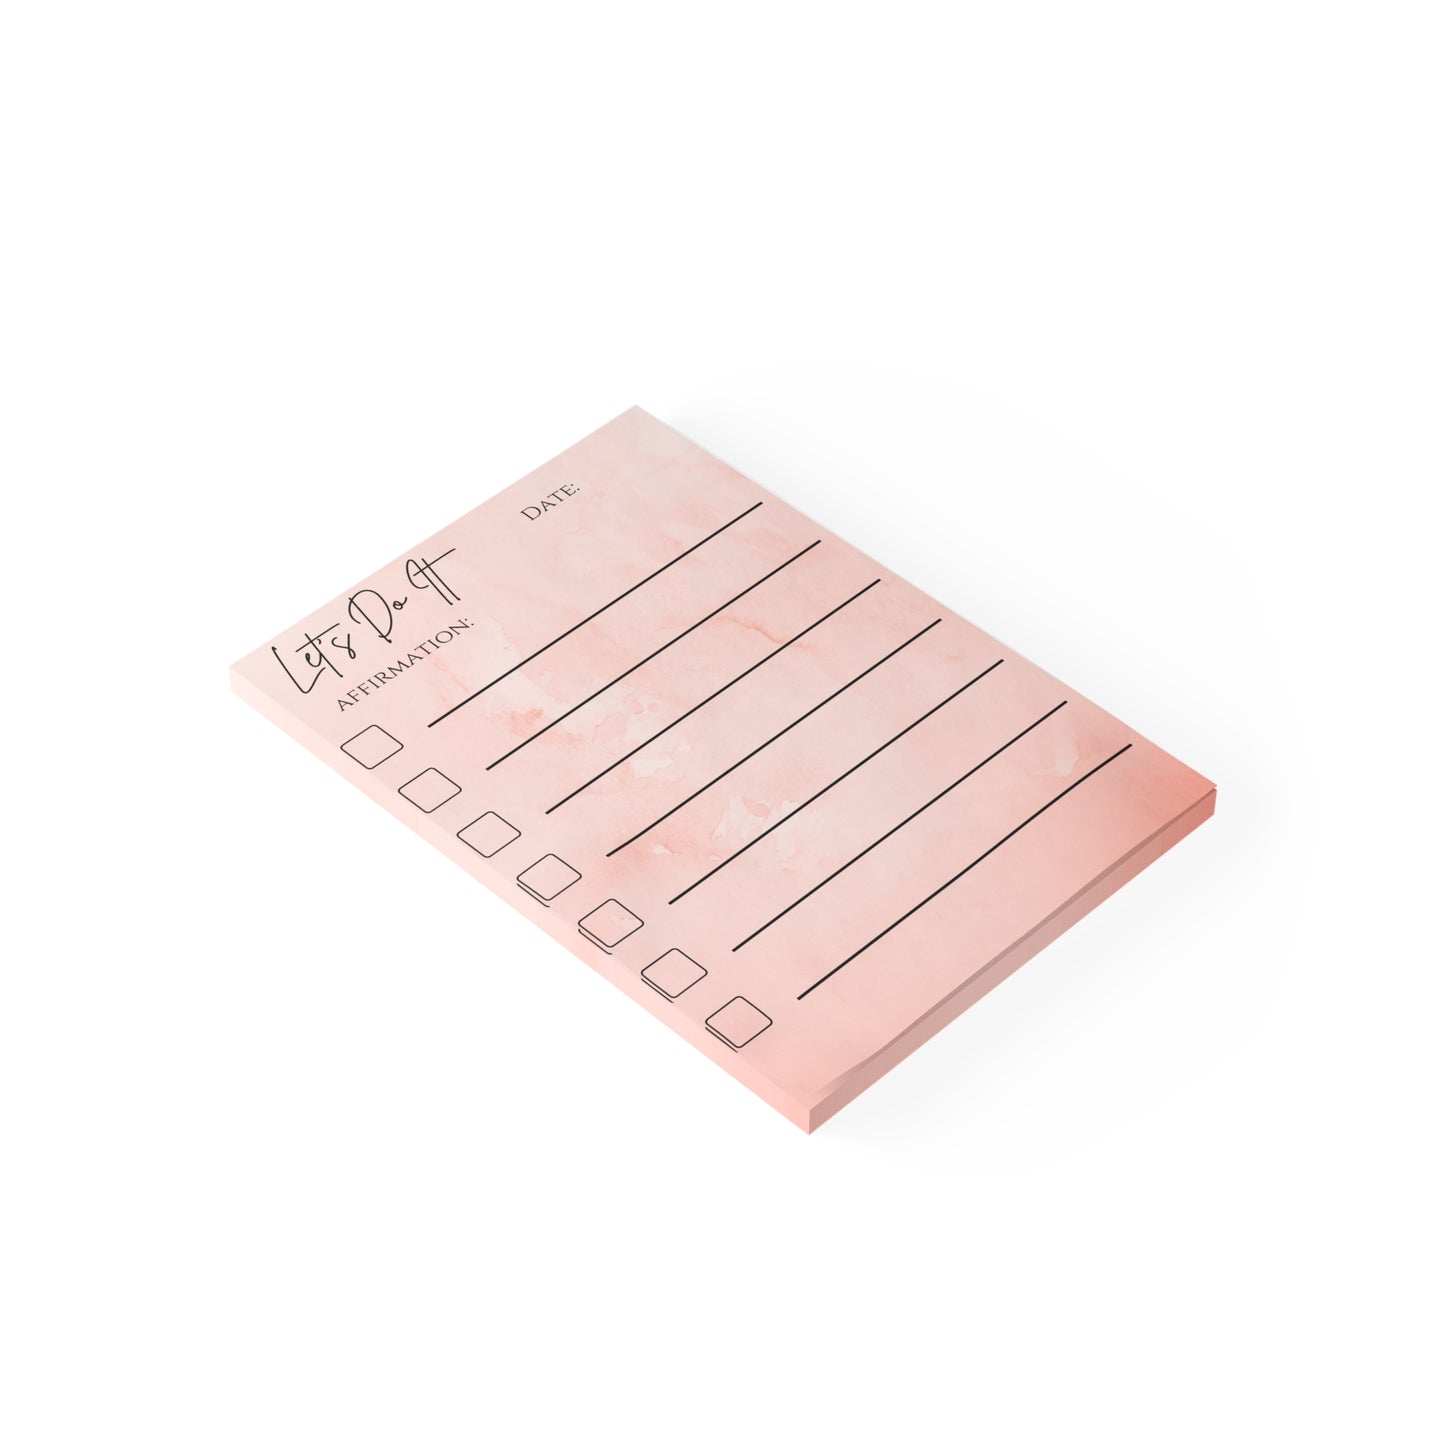 Post-it® Let's Do It Note Pads